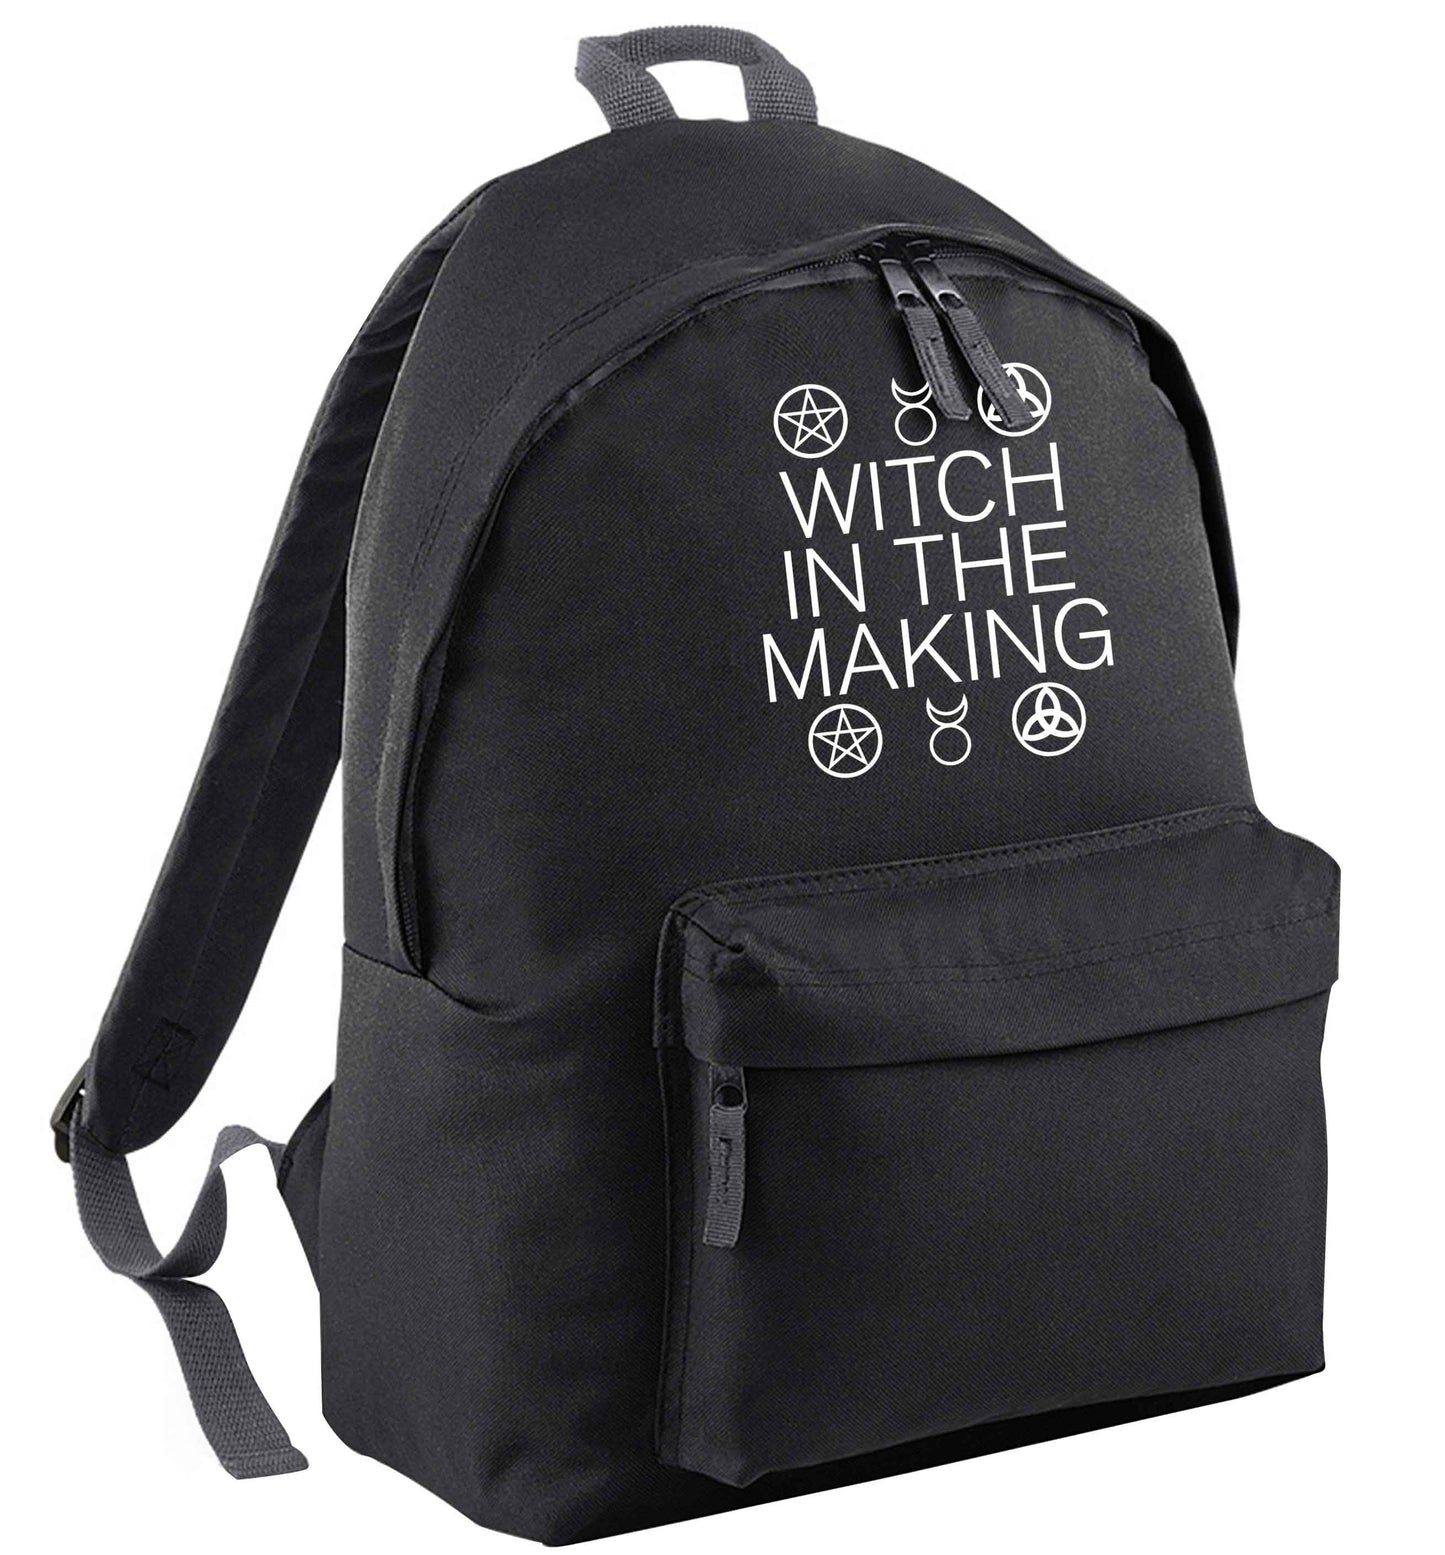 Witch in the making | Children's backpack